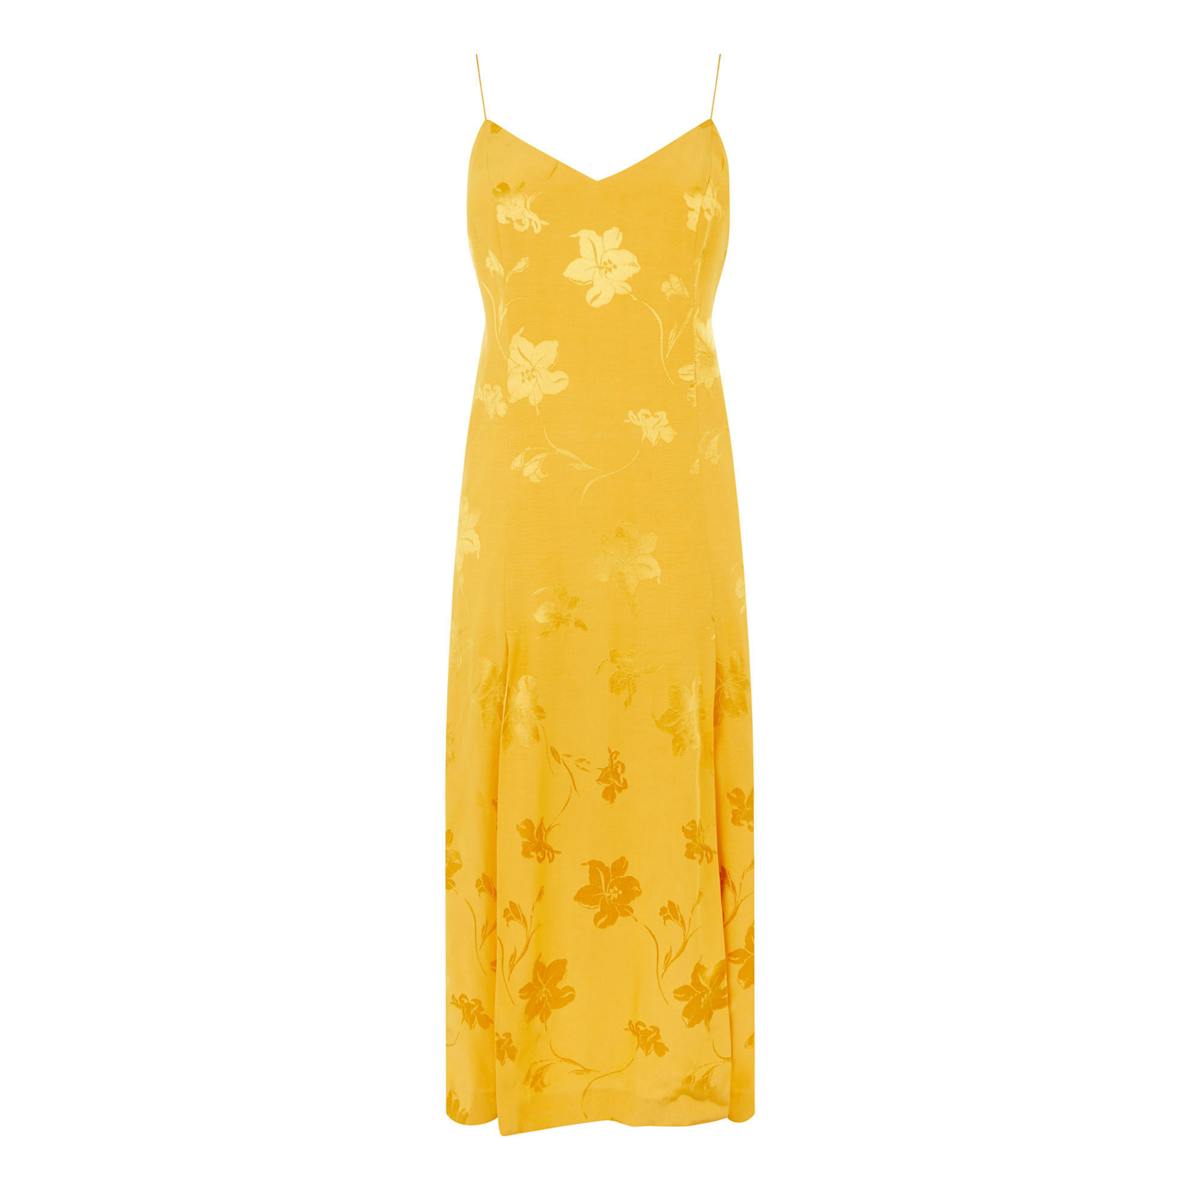 13 of the best yellow dresses for summer